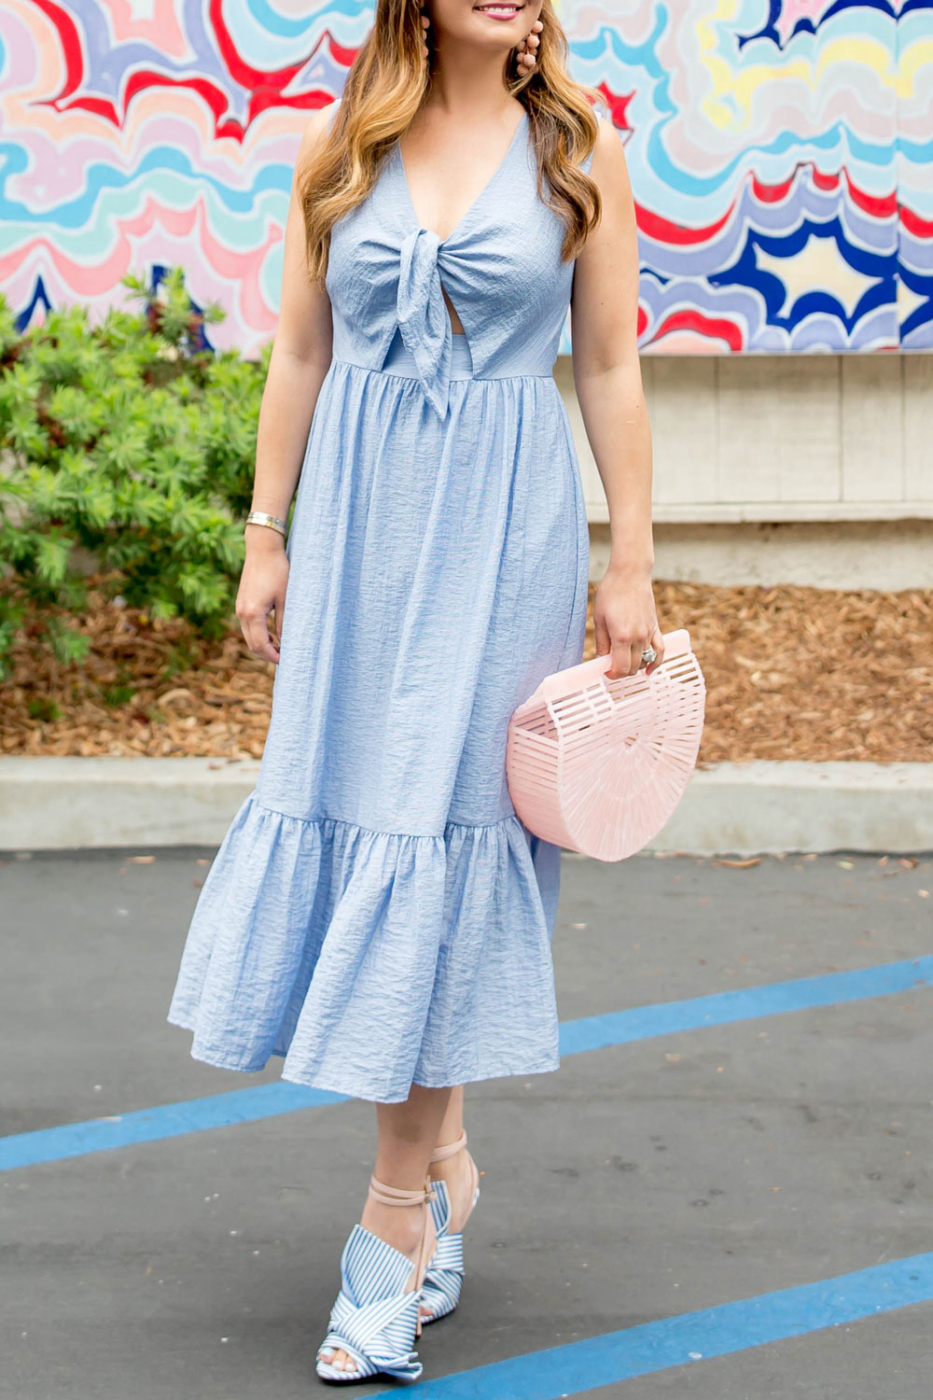 Shoshanna Tie Front Dress Styled With a Cult Gaia Pink Bag